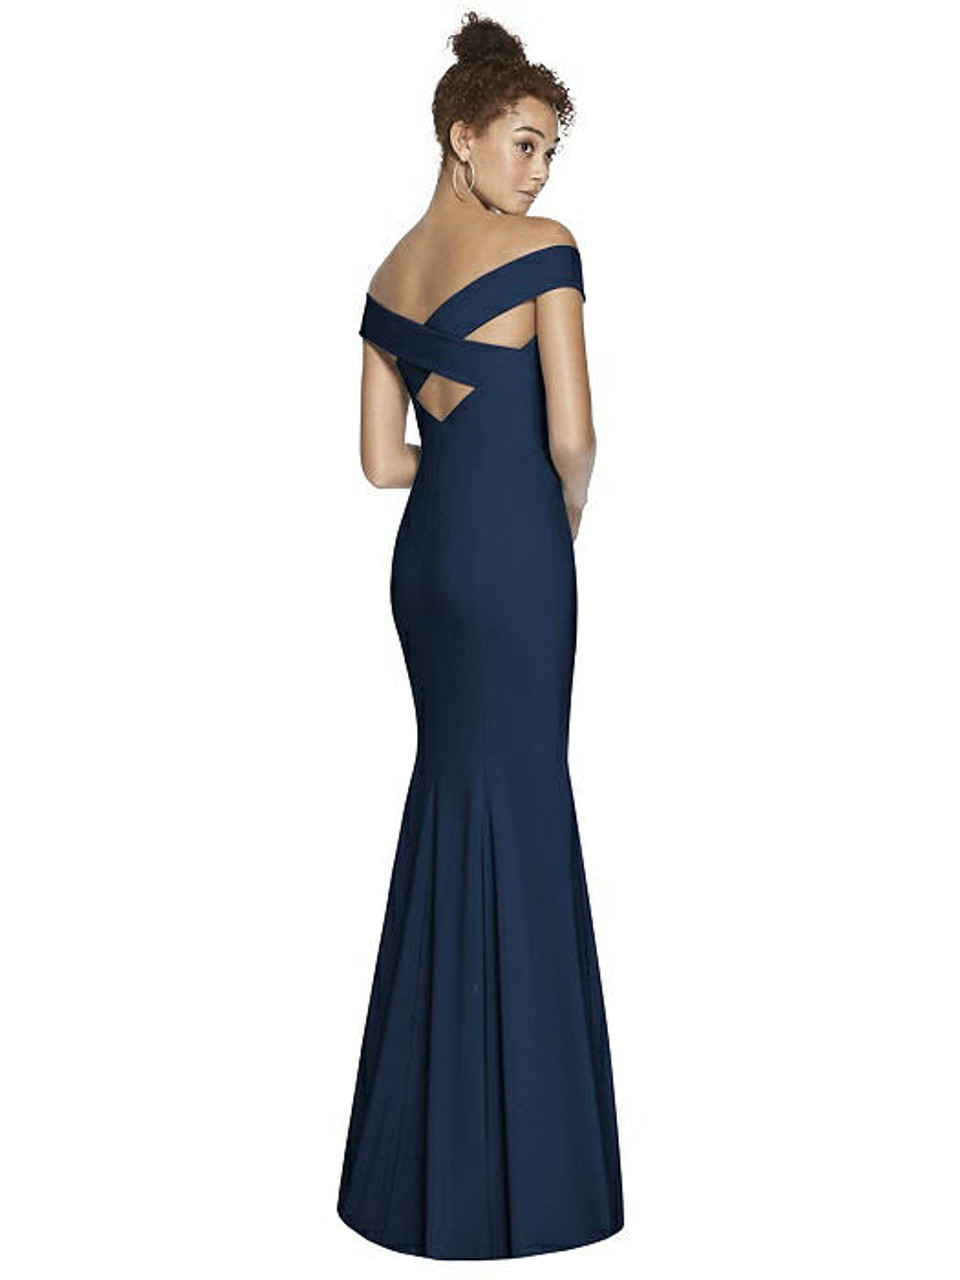 Dessy Bridesmaids Dress Style 3012 -Midnight - Crepe - In Stock Dress